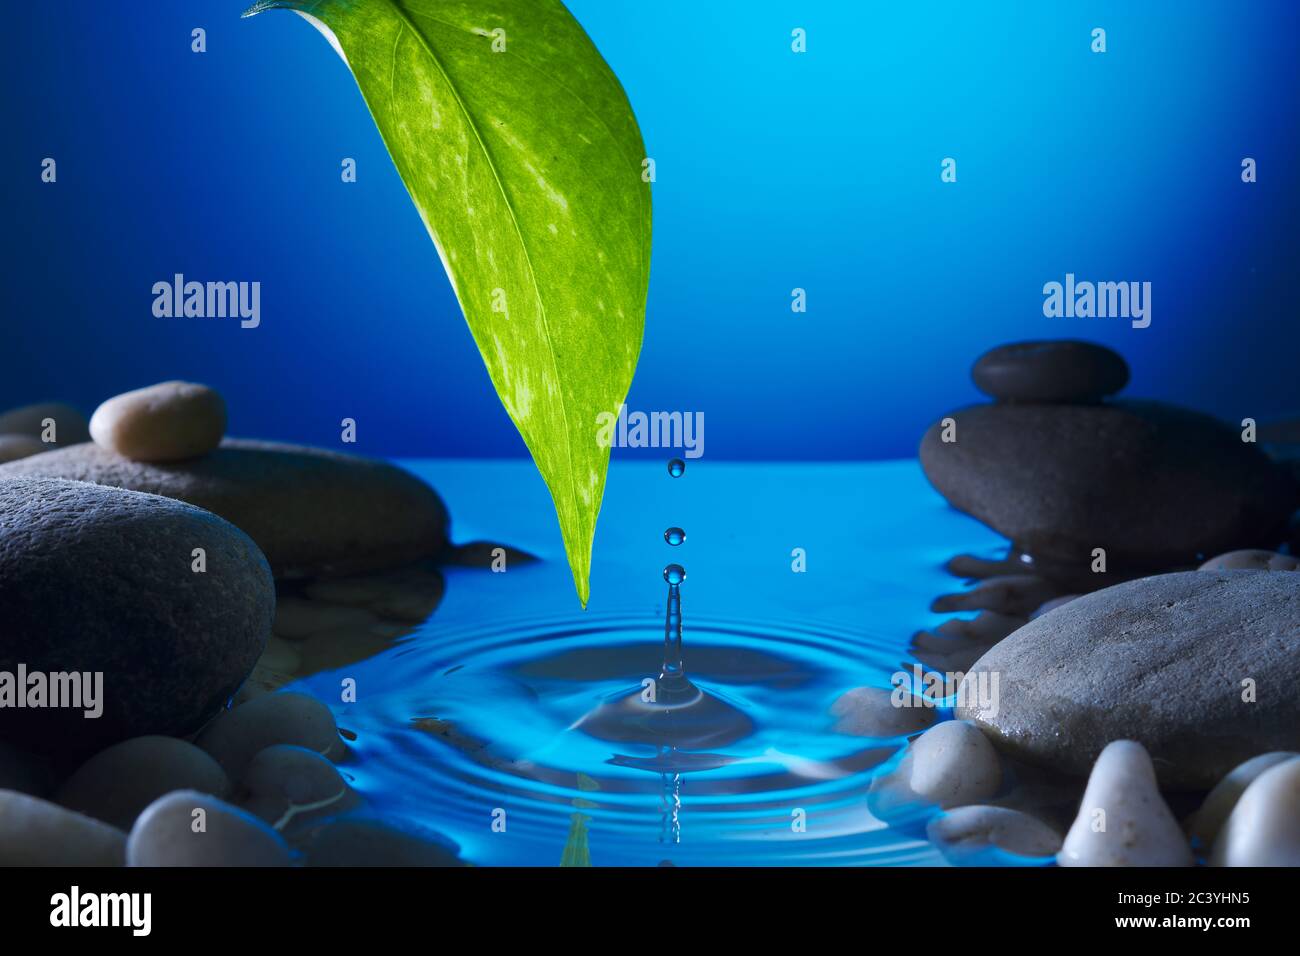 Perfect water drop falling from a leaf into a pond with ripples Blue tones to reflect puddle in night time surrounded by pebbles. Peaceful tranquility Stock Photo